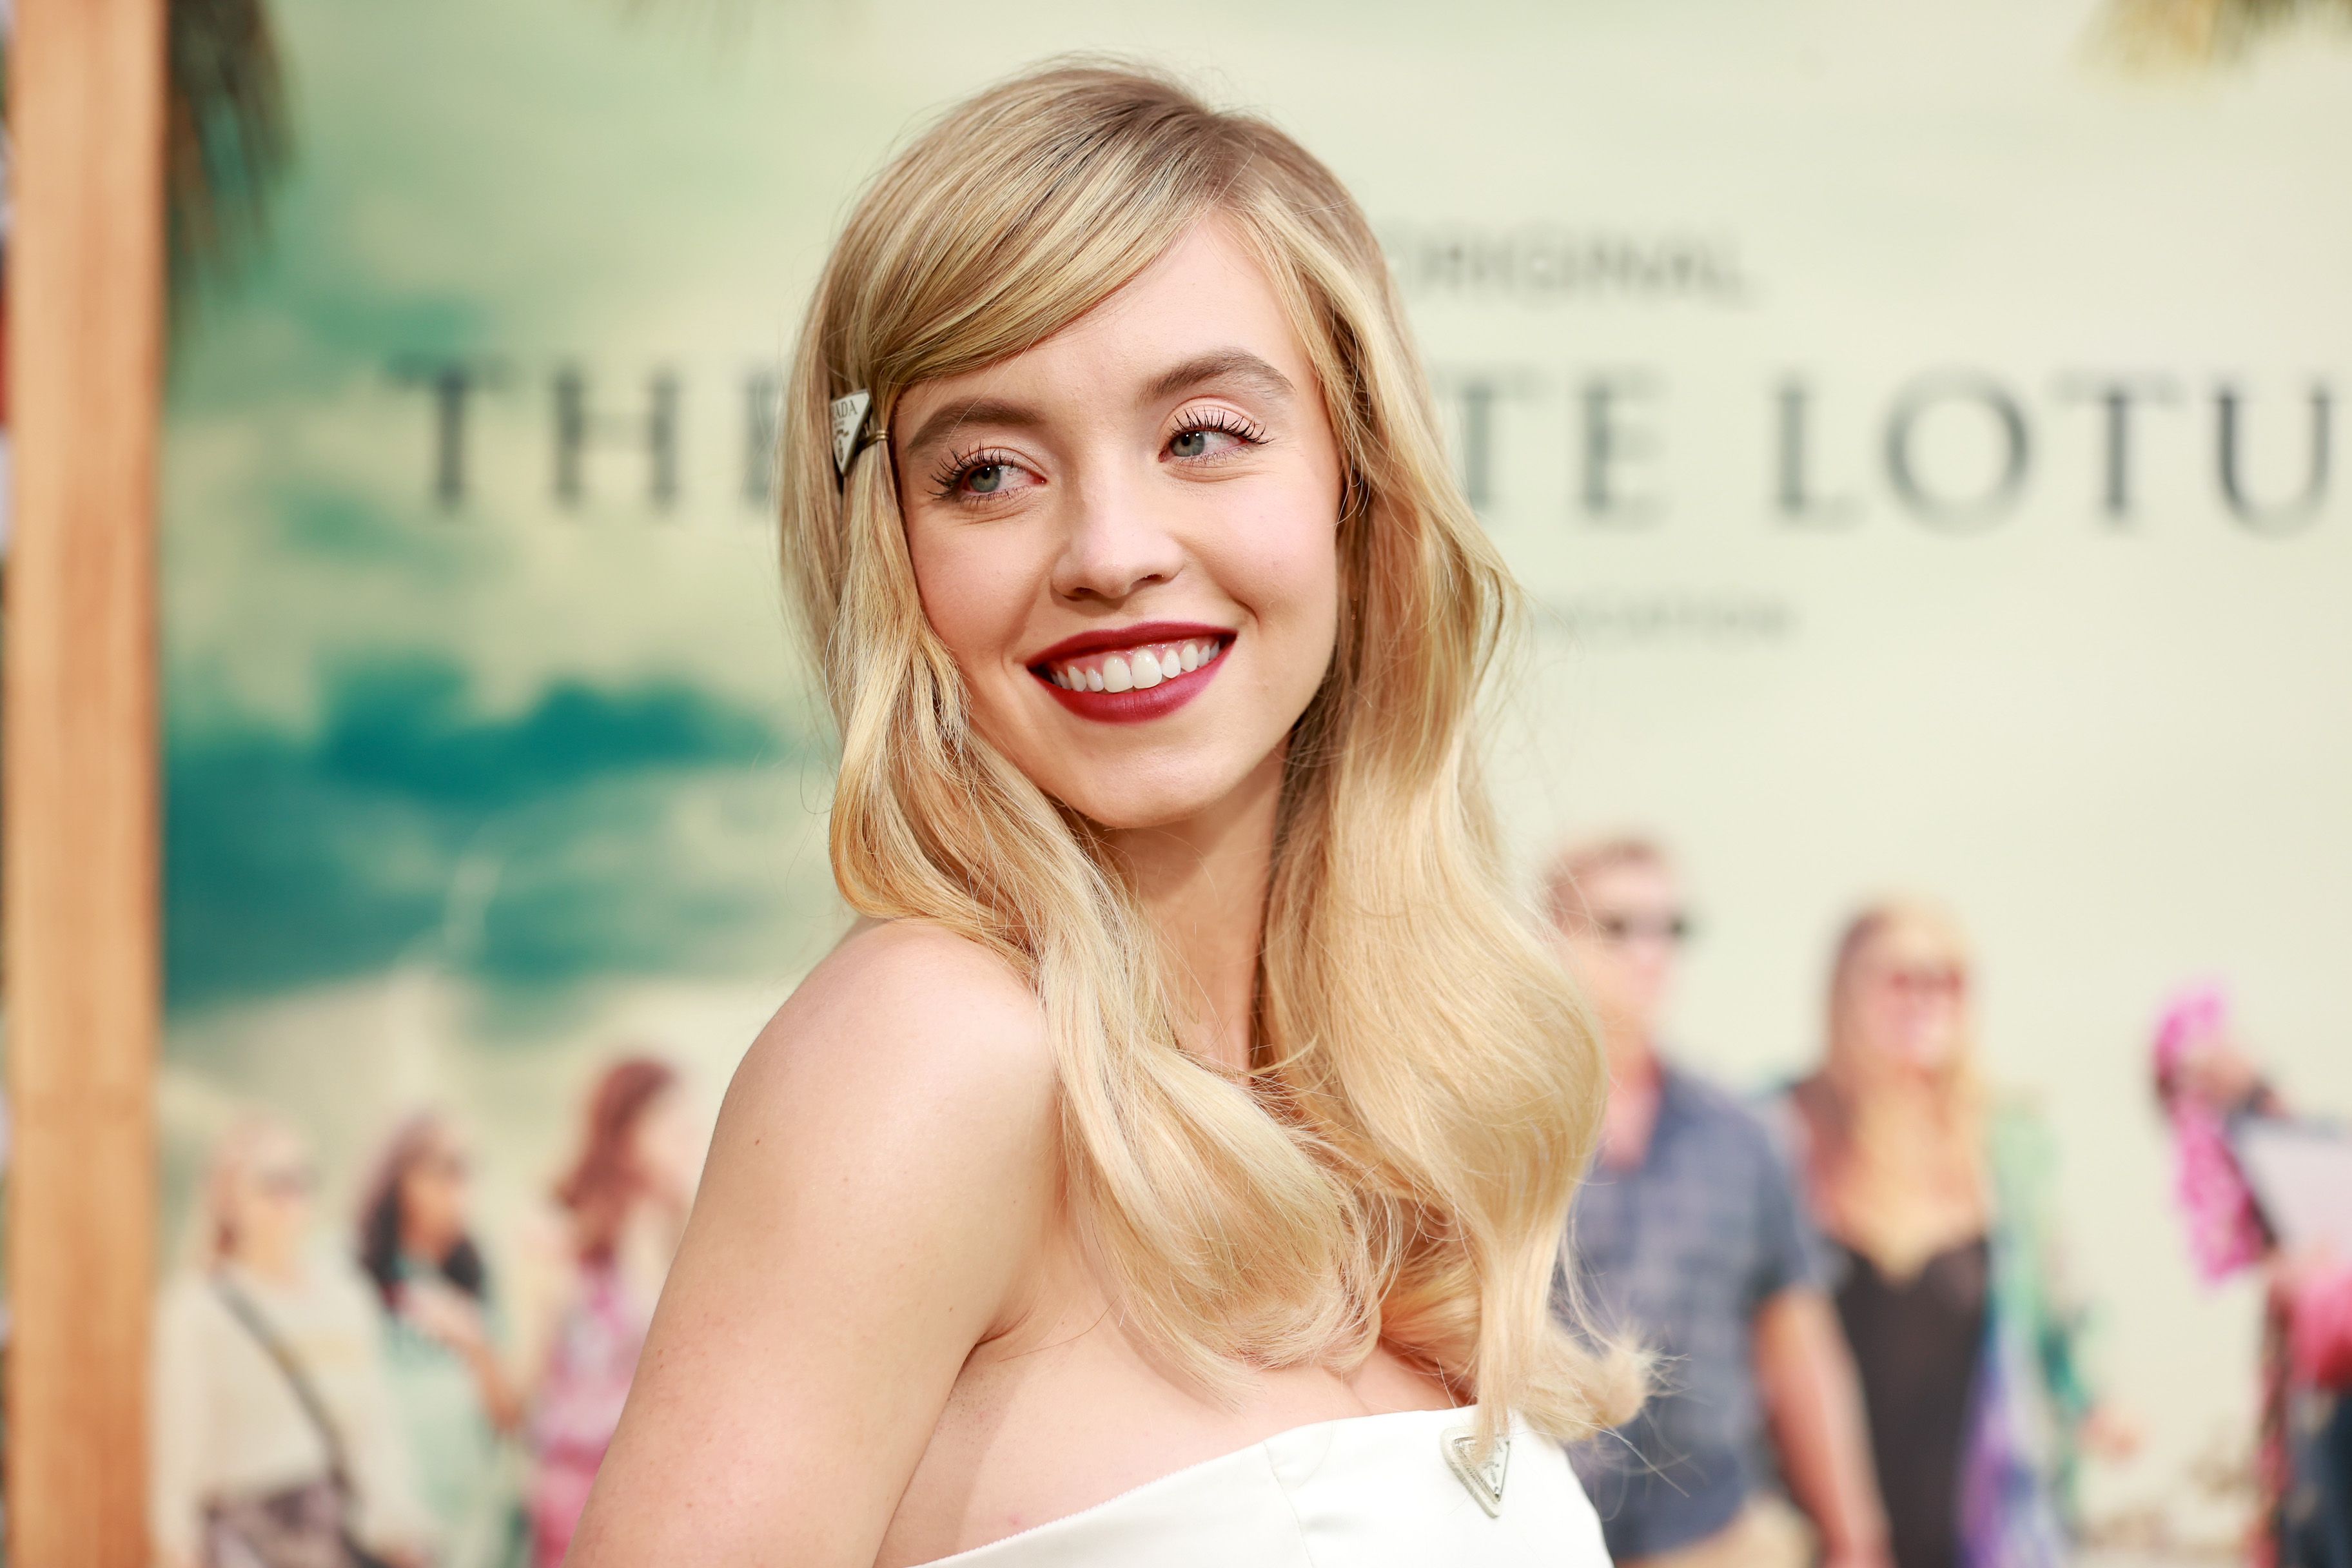 Sydney Sweeney arrives to 'The White Lotus' premiere in Los Angeles in a white dress